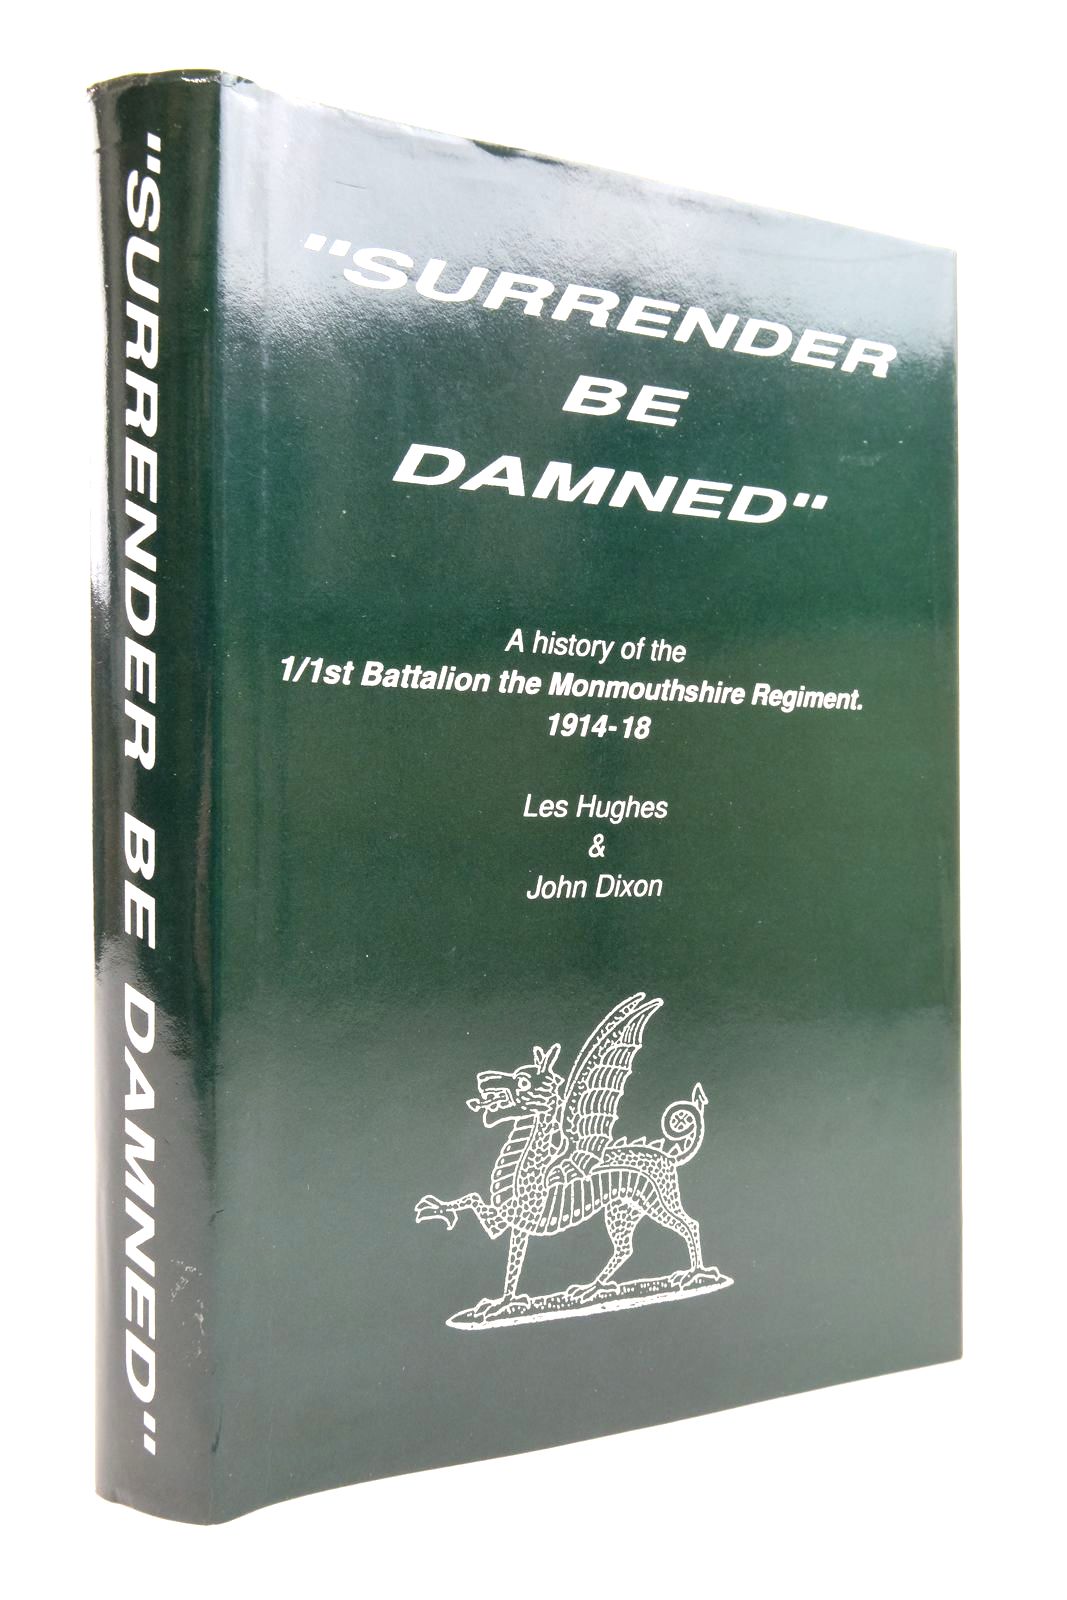 Photo of SURRENDER BE DAMNED written by Hughes, L. Dixon, J. published by CWM Press (STOCK CODE: 2138080)  for sale by Stella & Rose's Books